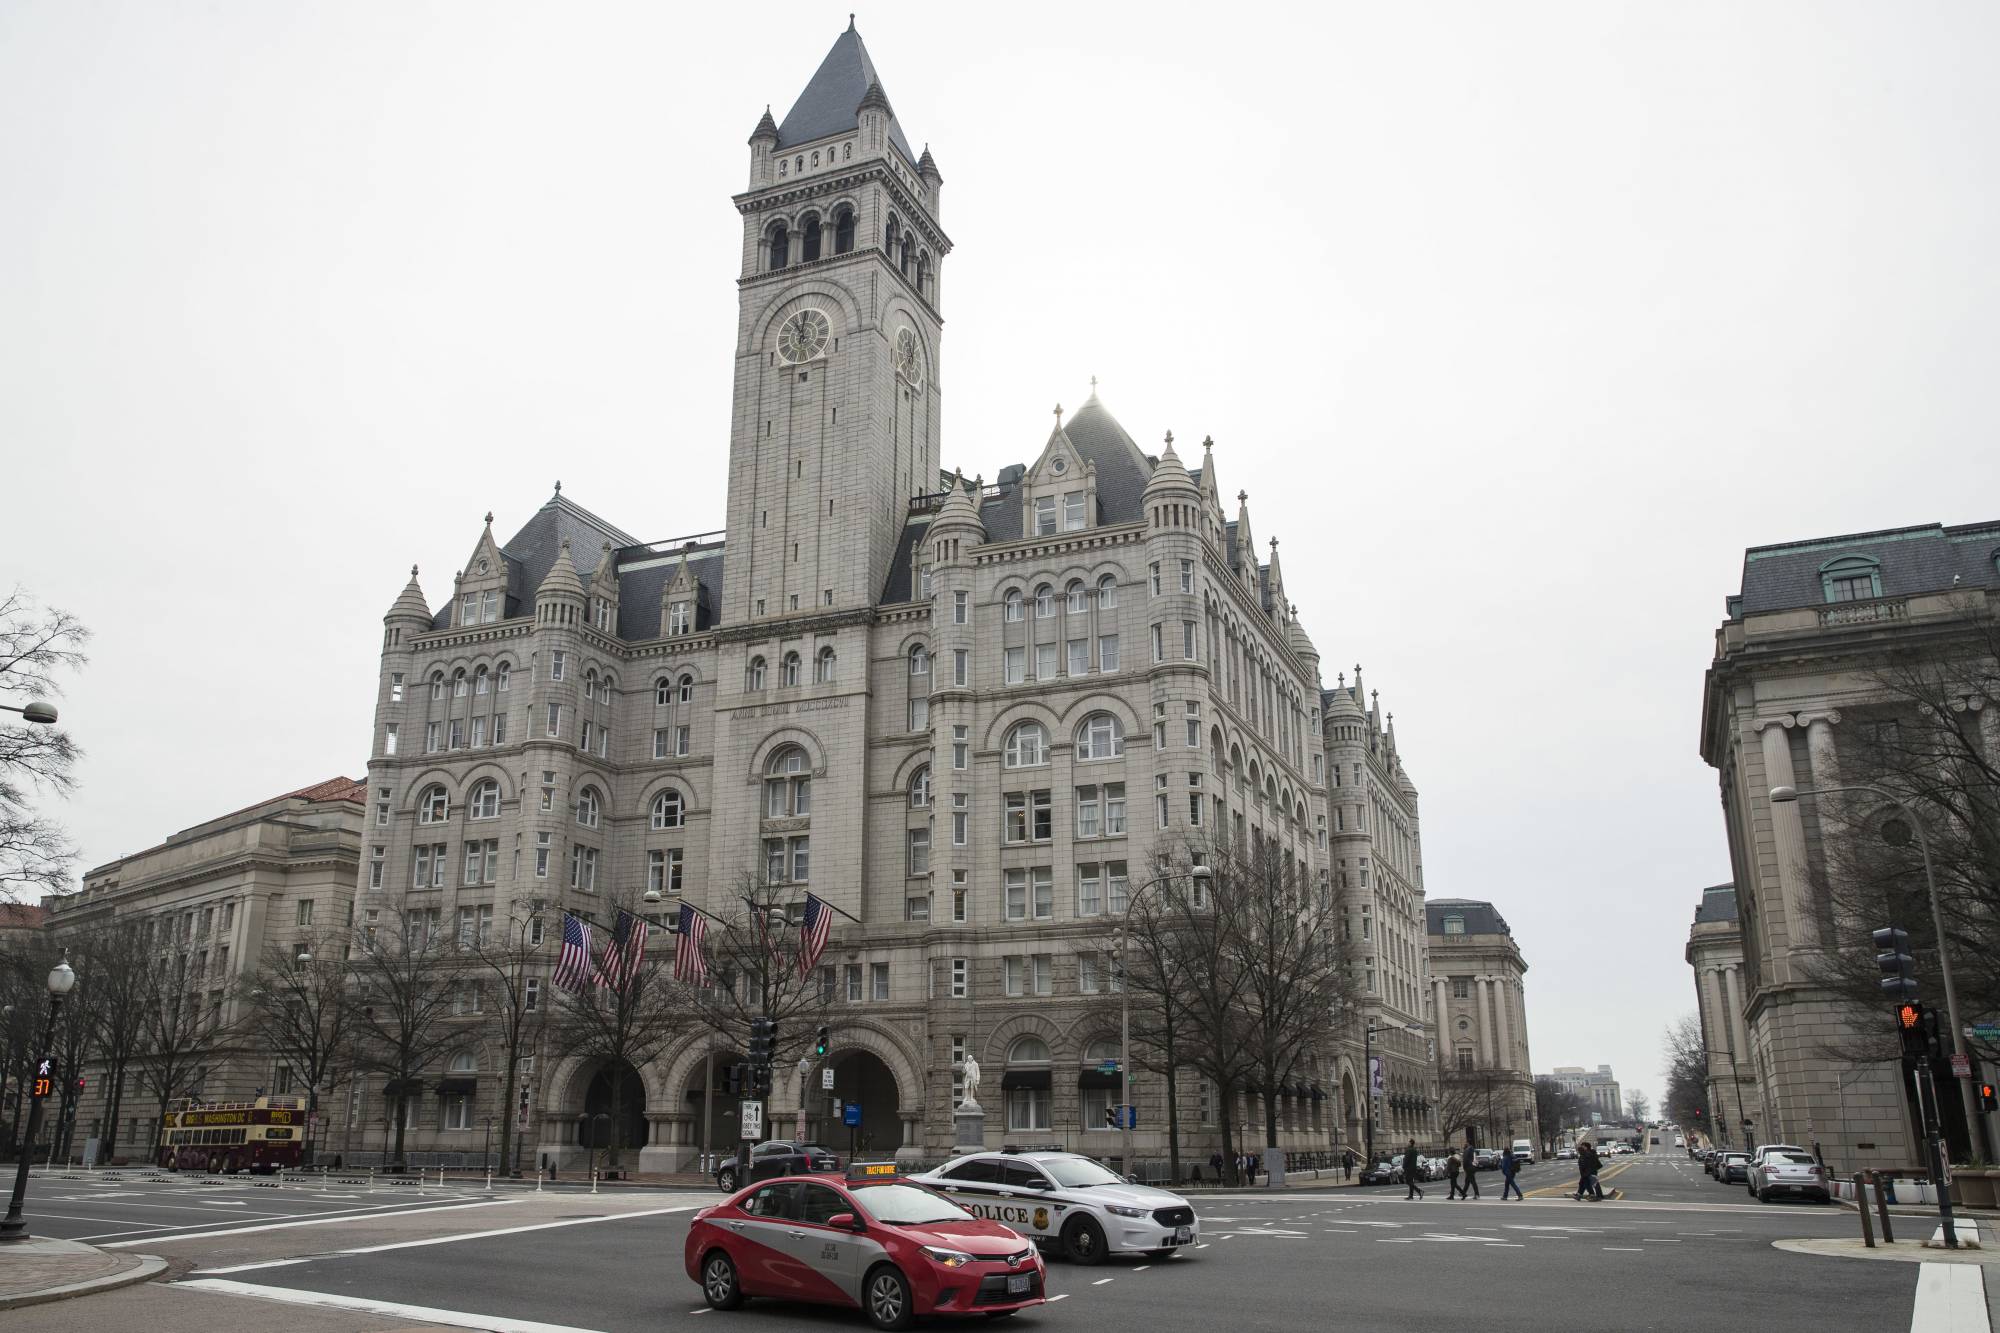 The Old Post Office Pavilion Clock Tower, which remains open during the partial government shutdown, is seen above the Trump International Hotel, Friday, Jan. 4, 2019 in Washington. (AP Photo/Alex Brandon)